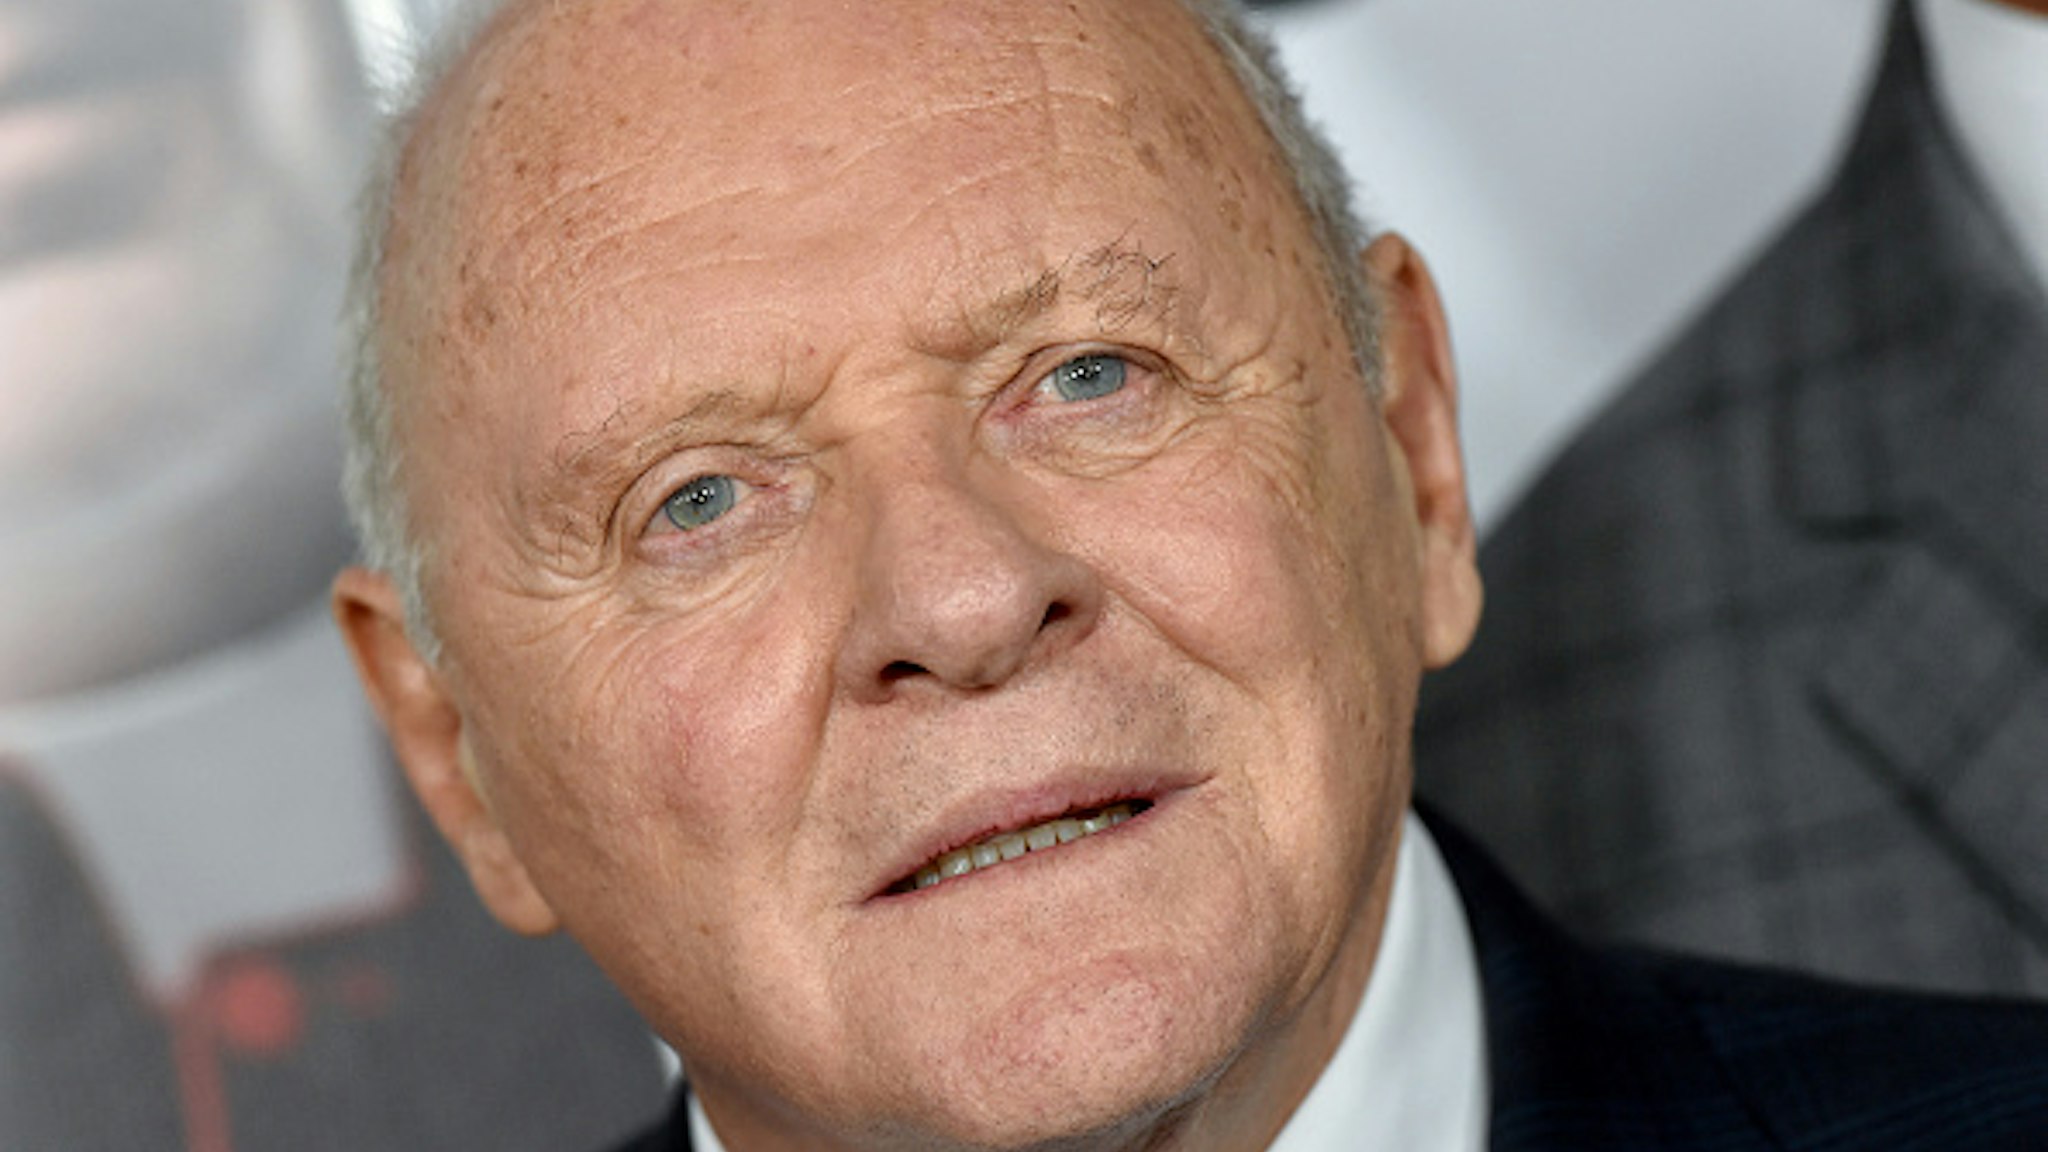 HOLLYWOOD, CALIFORNIA - NOVEMBER 18: Anthony Hopkins attends the "The Two Popes" premiere during AFI FEST 2019 presented by Audi at TCL Chinese Theatre on November 18, 2019 in Hollywood, California.